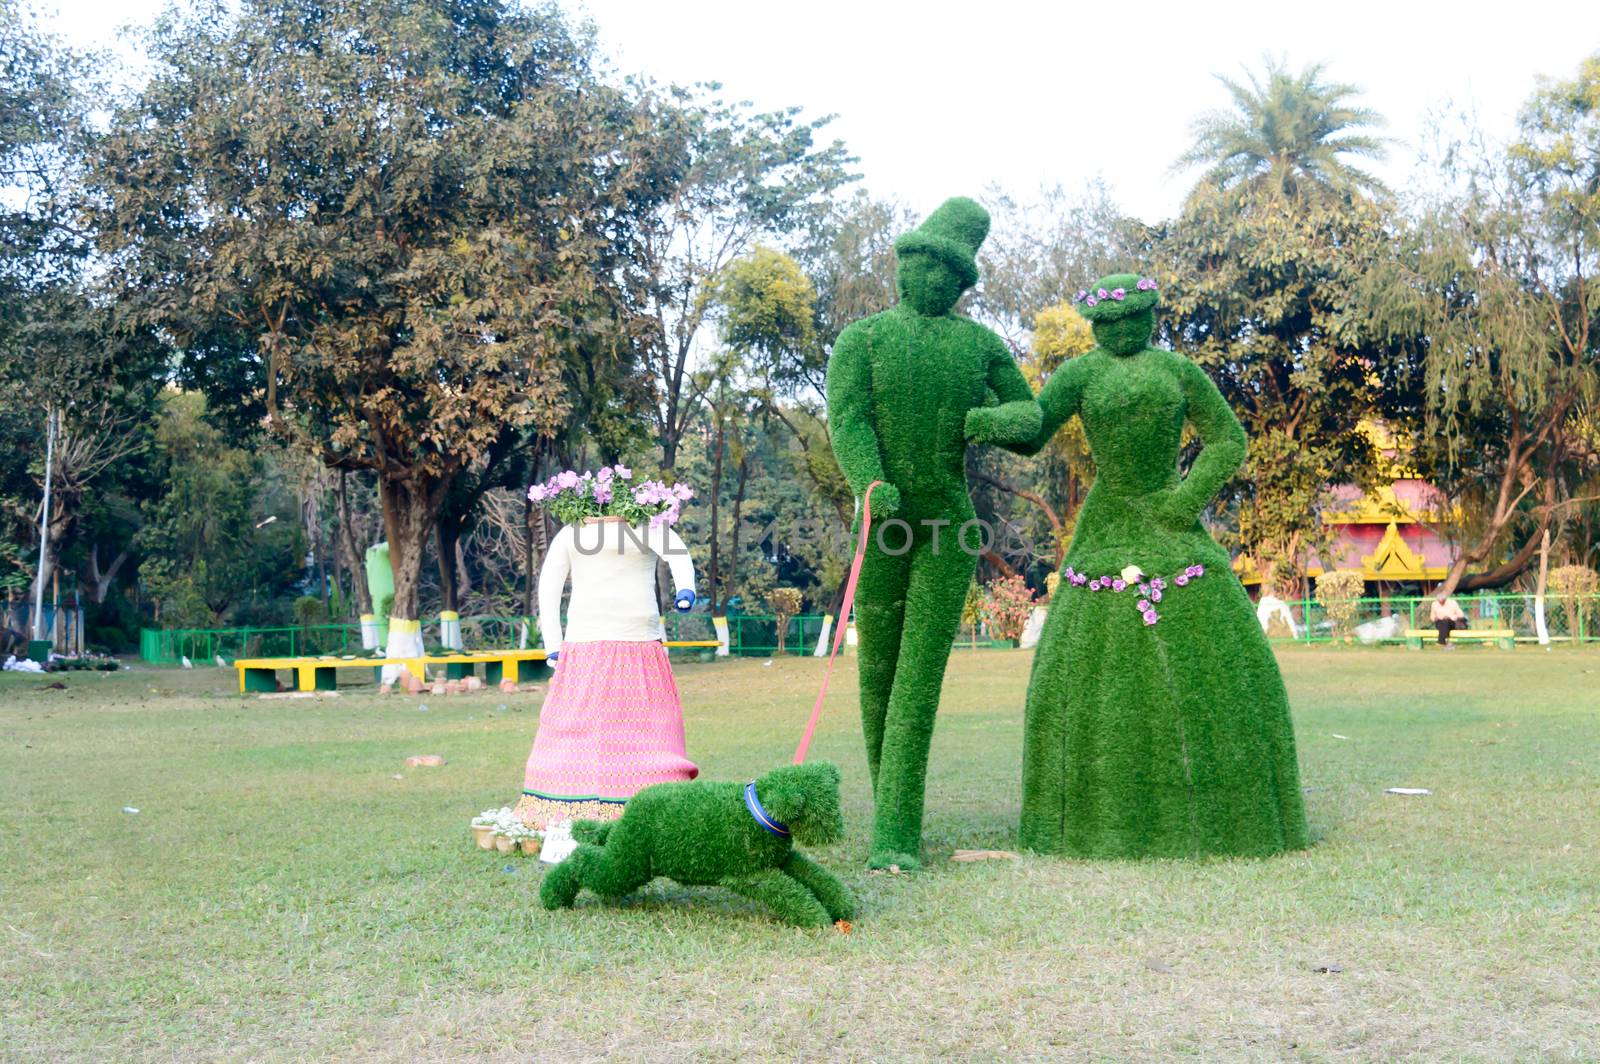 Beautiful Green Topiary art crafted design element representing Happy Couple by clipping pruning twigs and foliage in amazing shape and fanciful hedges. Eden Garden City Park Kolkata May 2019 by sudiptabhowmick